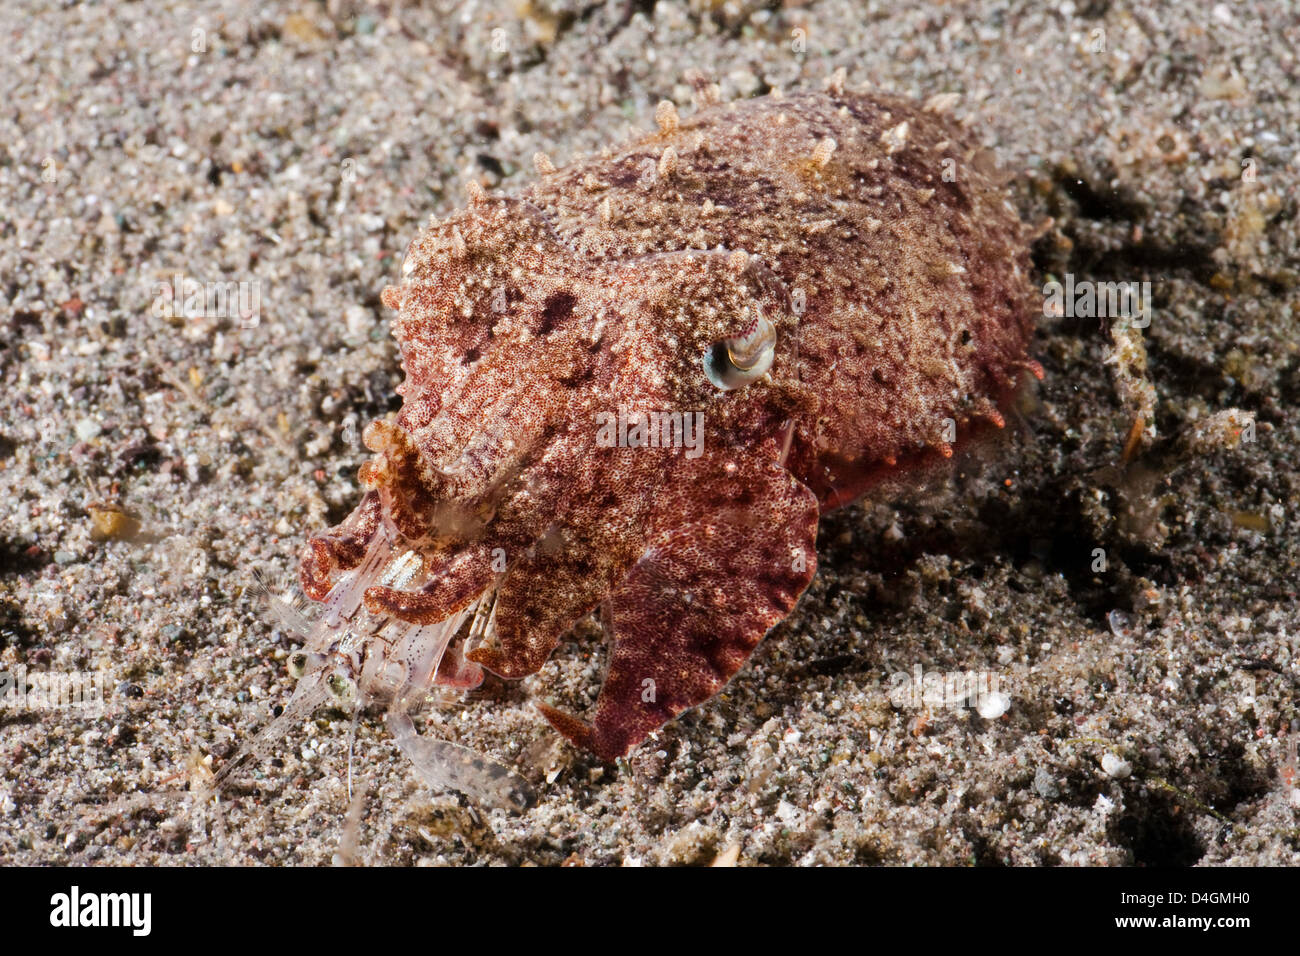 The stumpy-spined cuttlefish, Sepia bandensis, is common on coral reefs, but only seen at night, Komodo National Park, Indonesia Stock Photo